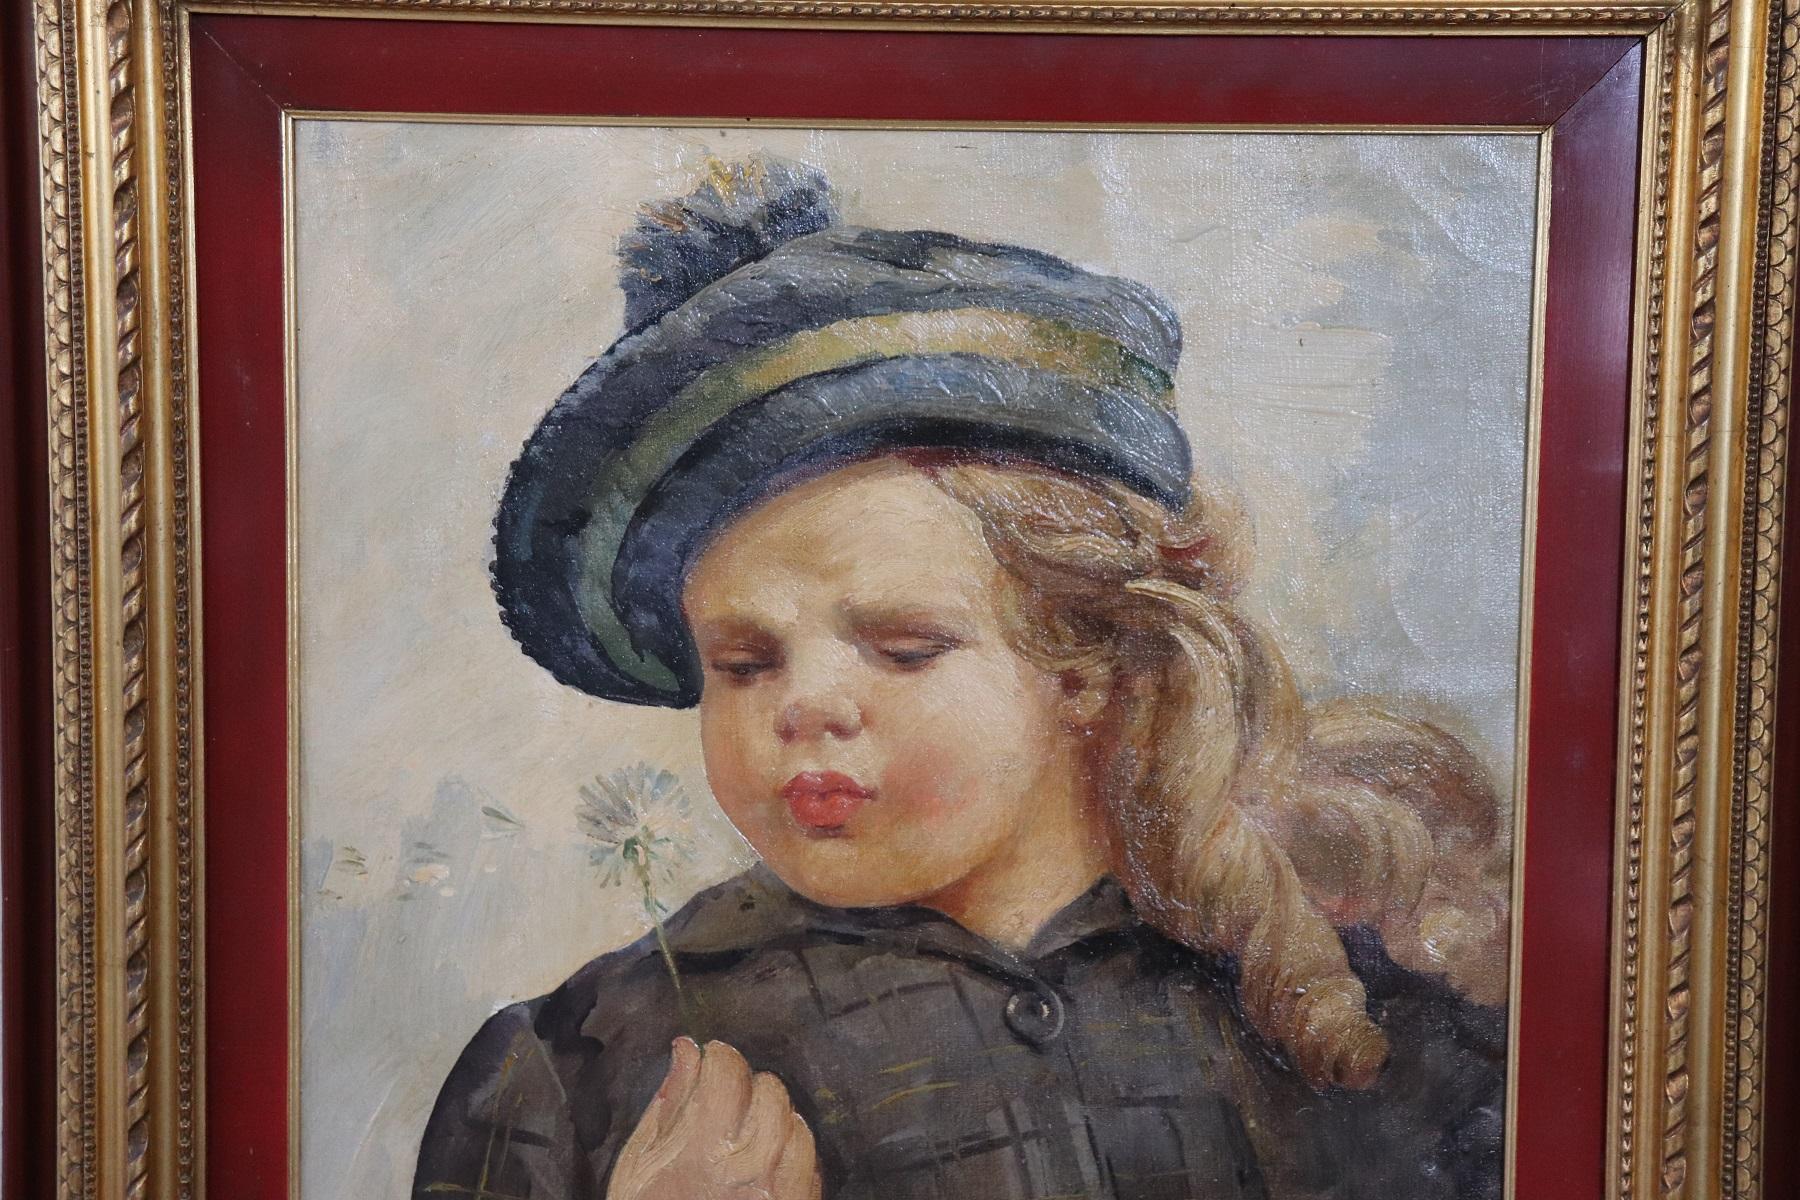 Oil painting on canvas beautiful Portrait of a baby excellent pictorial quality. The painting is French dated 1919 and signed by the artist. The painting presents all the characteristics of impressionist taste. Perfect use of colors the baby is made